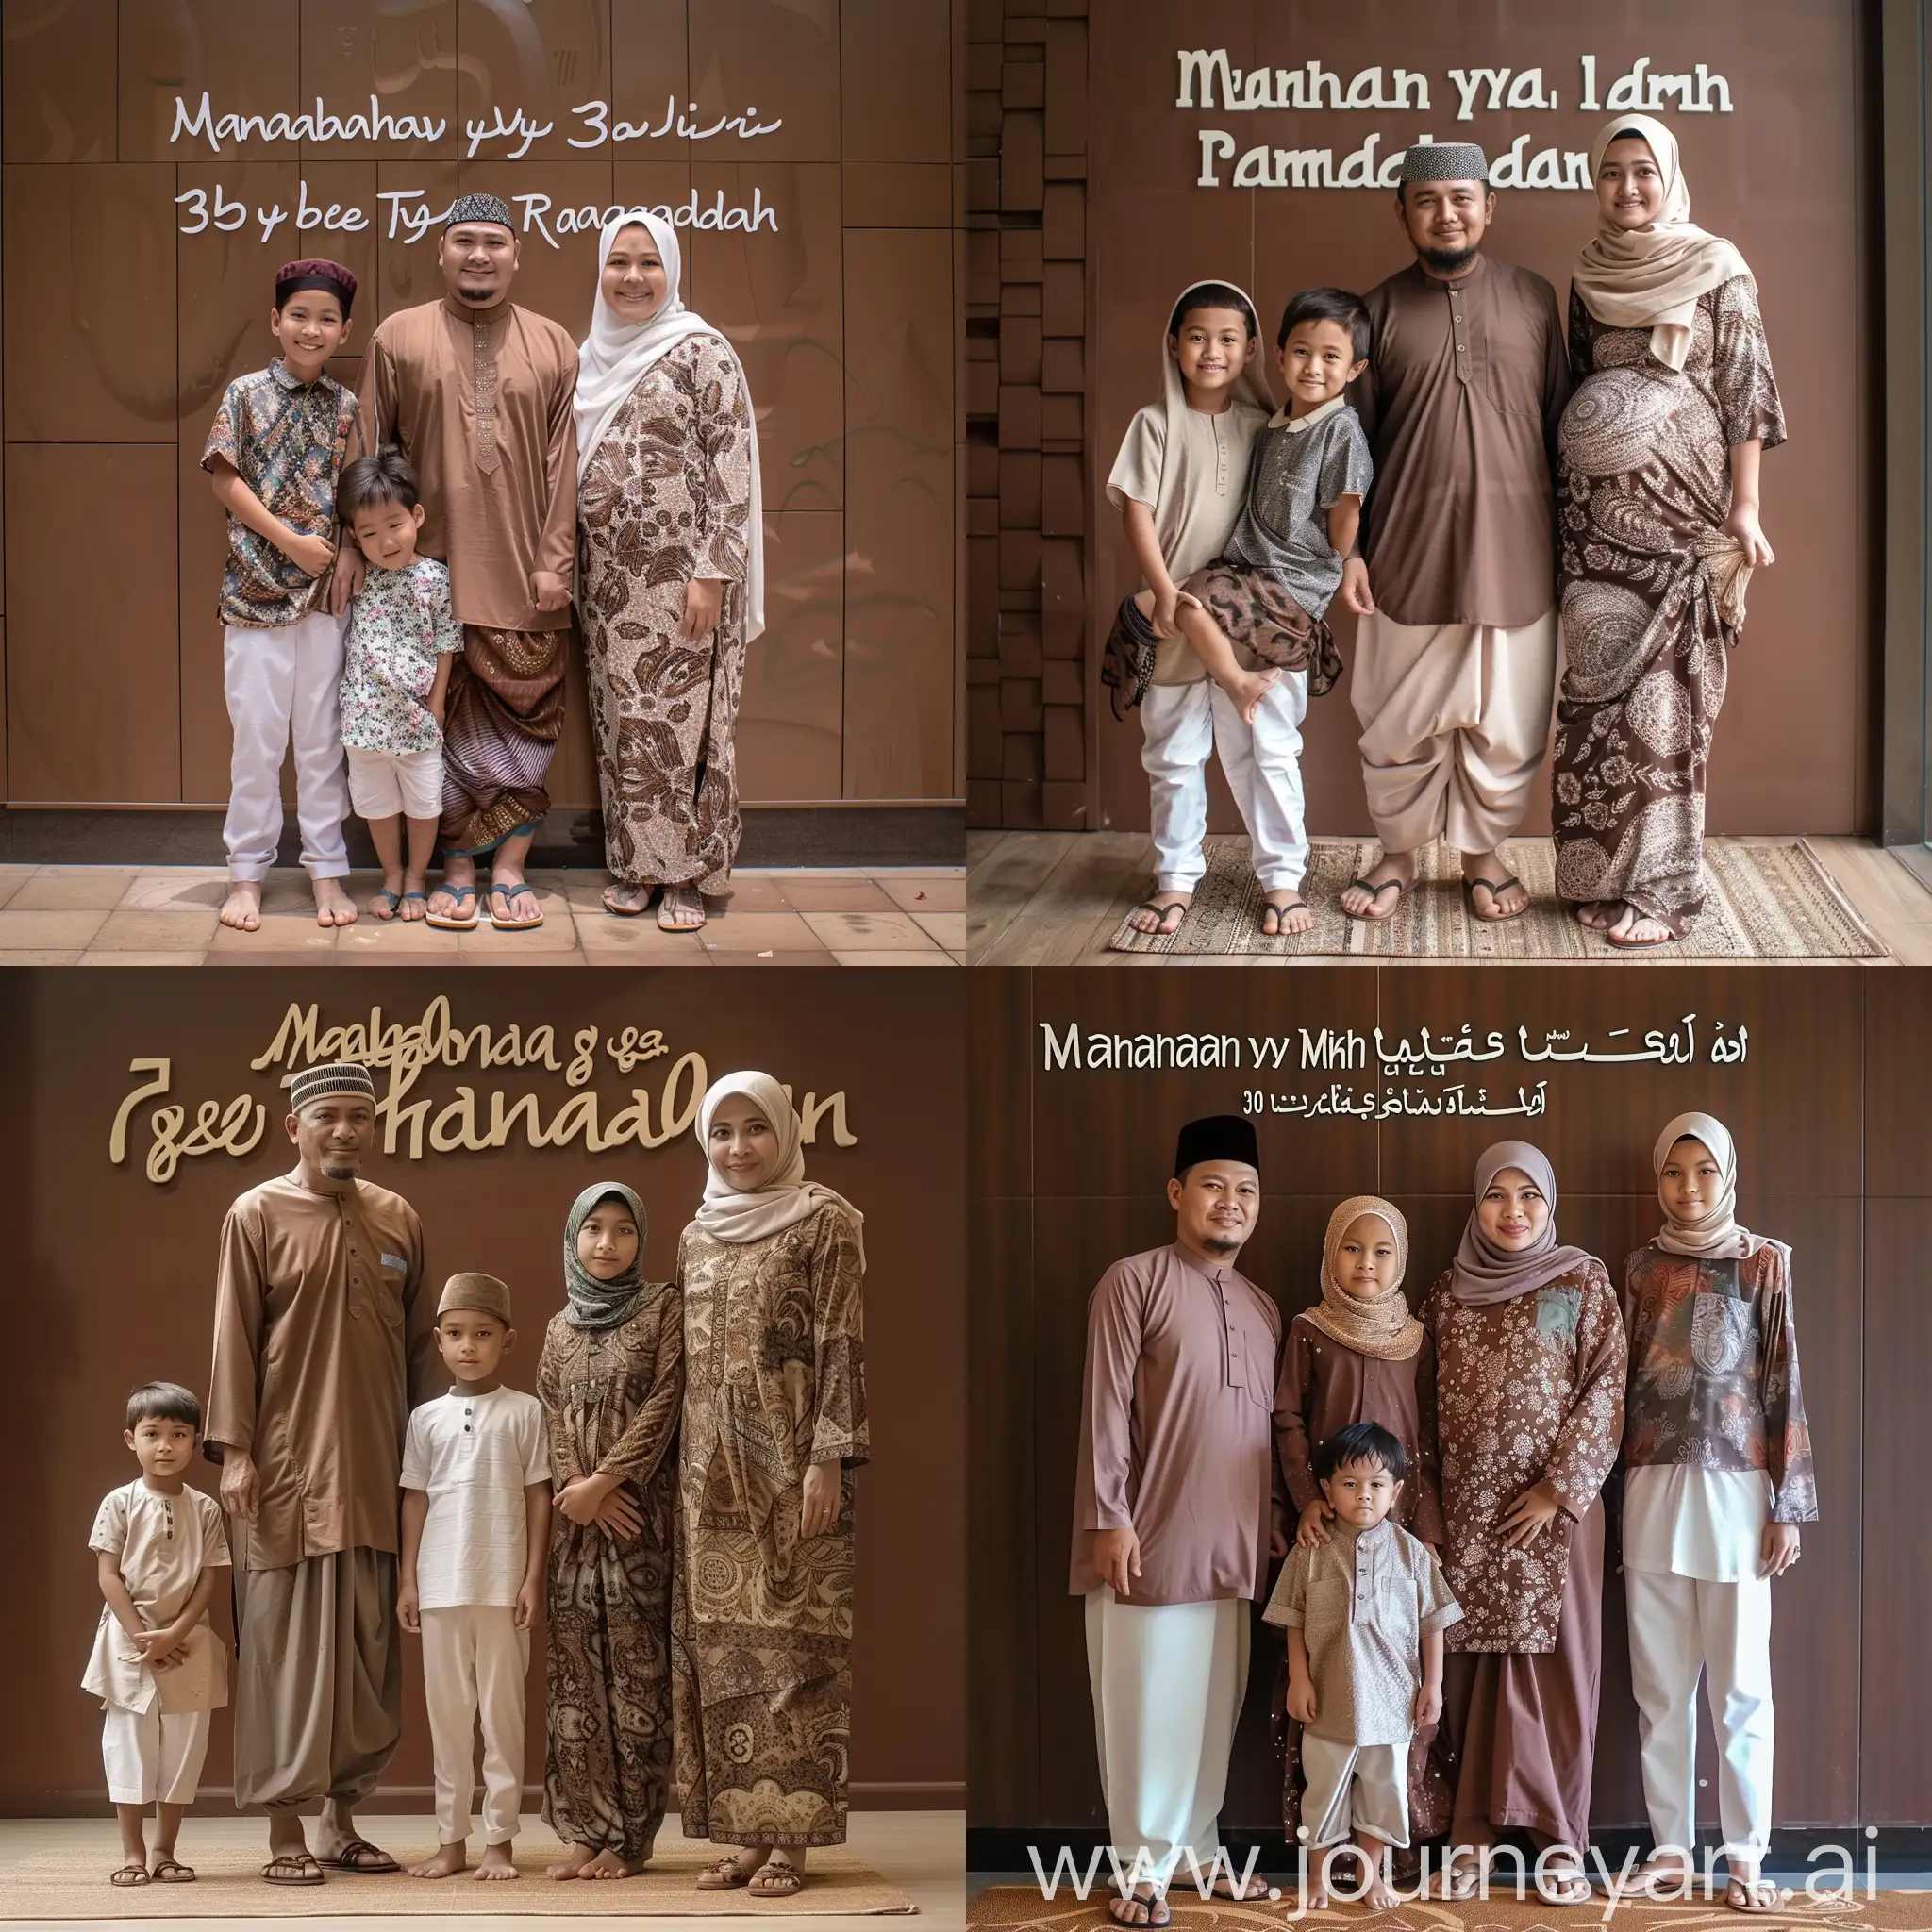 photo of an Indonesian Muslim family of four  35 year old Indonesian Muslim man wearing a skullcap wearing a koko sarong wearing sandals  33 year old Indonesian woman wearing hijab and sandals  8 year old Indonesian man wearing white koko trousers and sandals  11 year old woman wearing hijab and sandals  the background on the brown wall is written in 3D "Marhaban yaa Ramadhan, Sorry to be born 